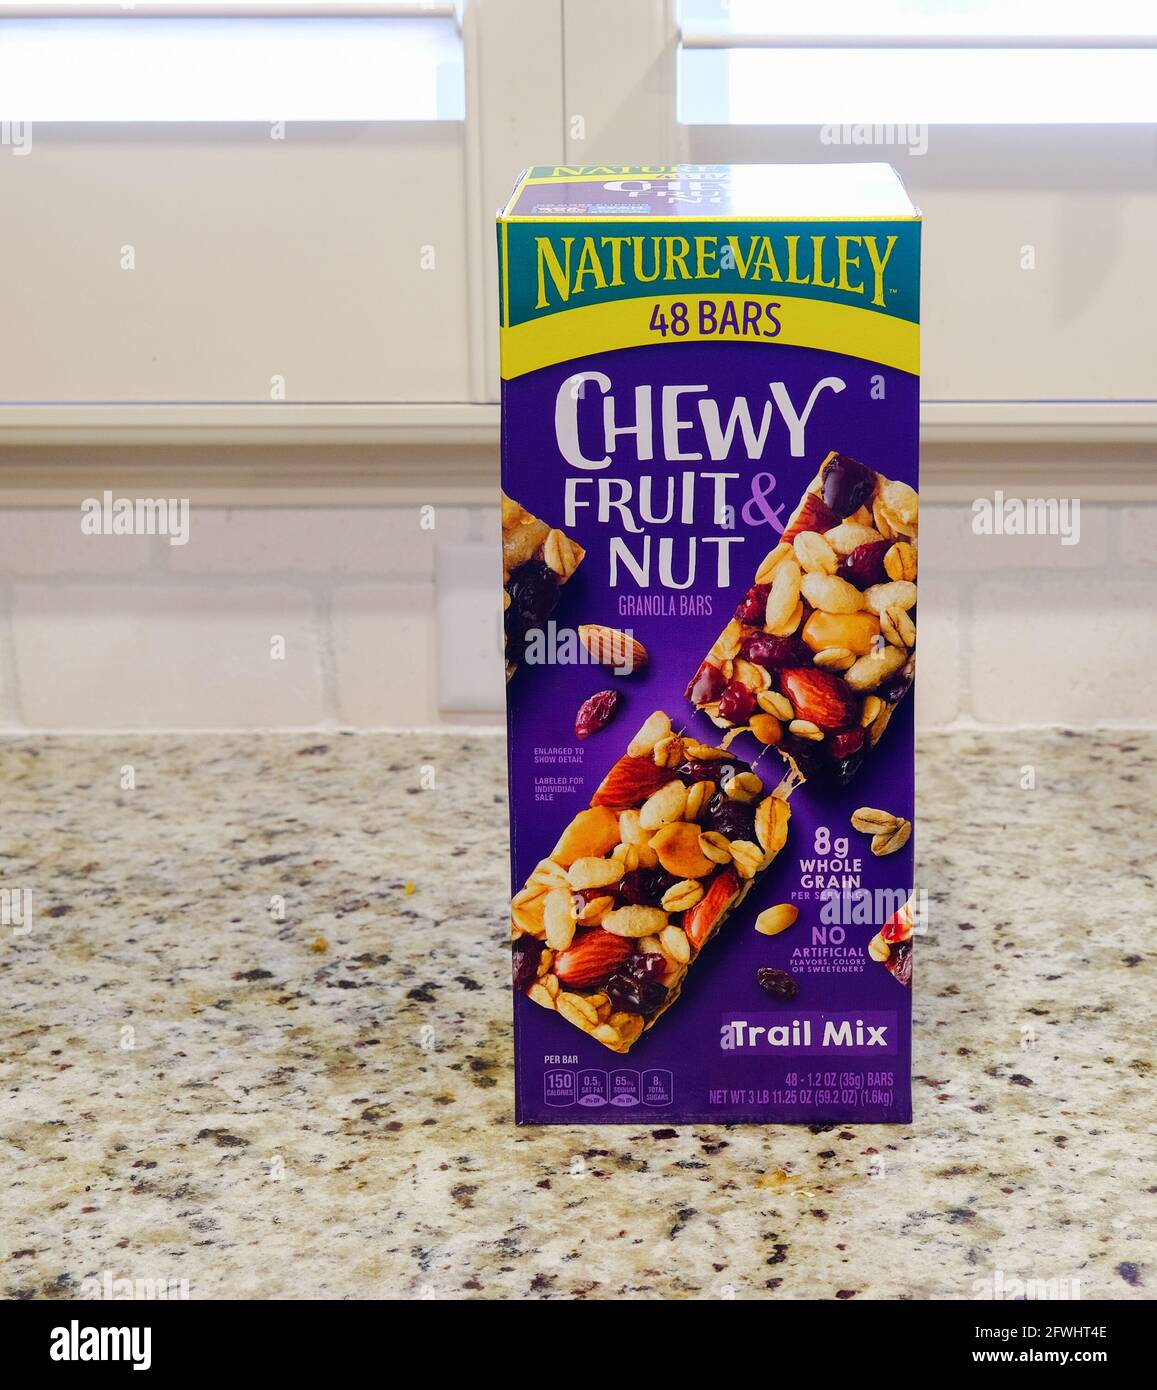 Nature Valley Chewy Granola Bars Stock Photo